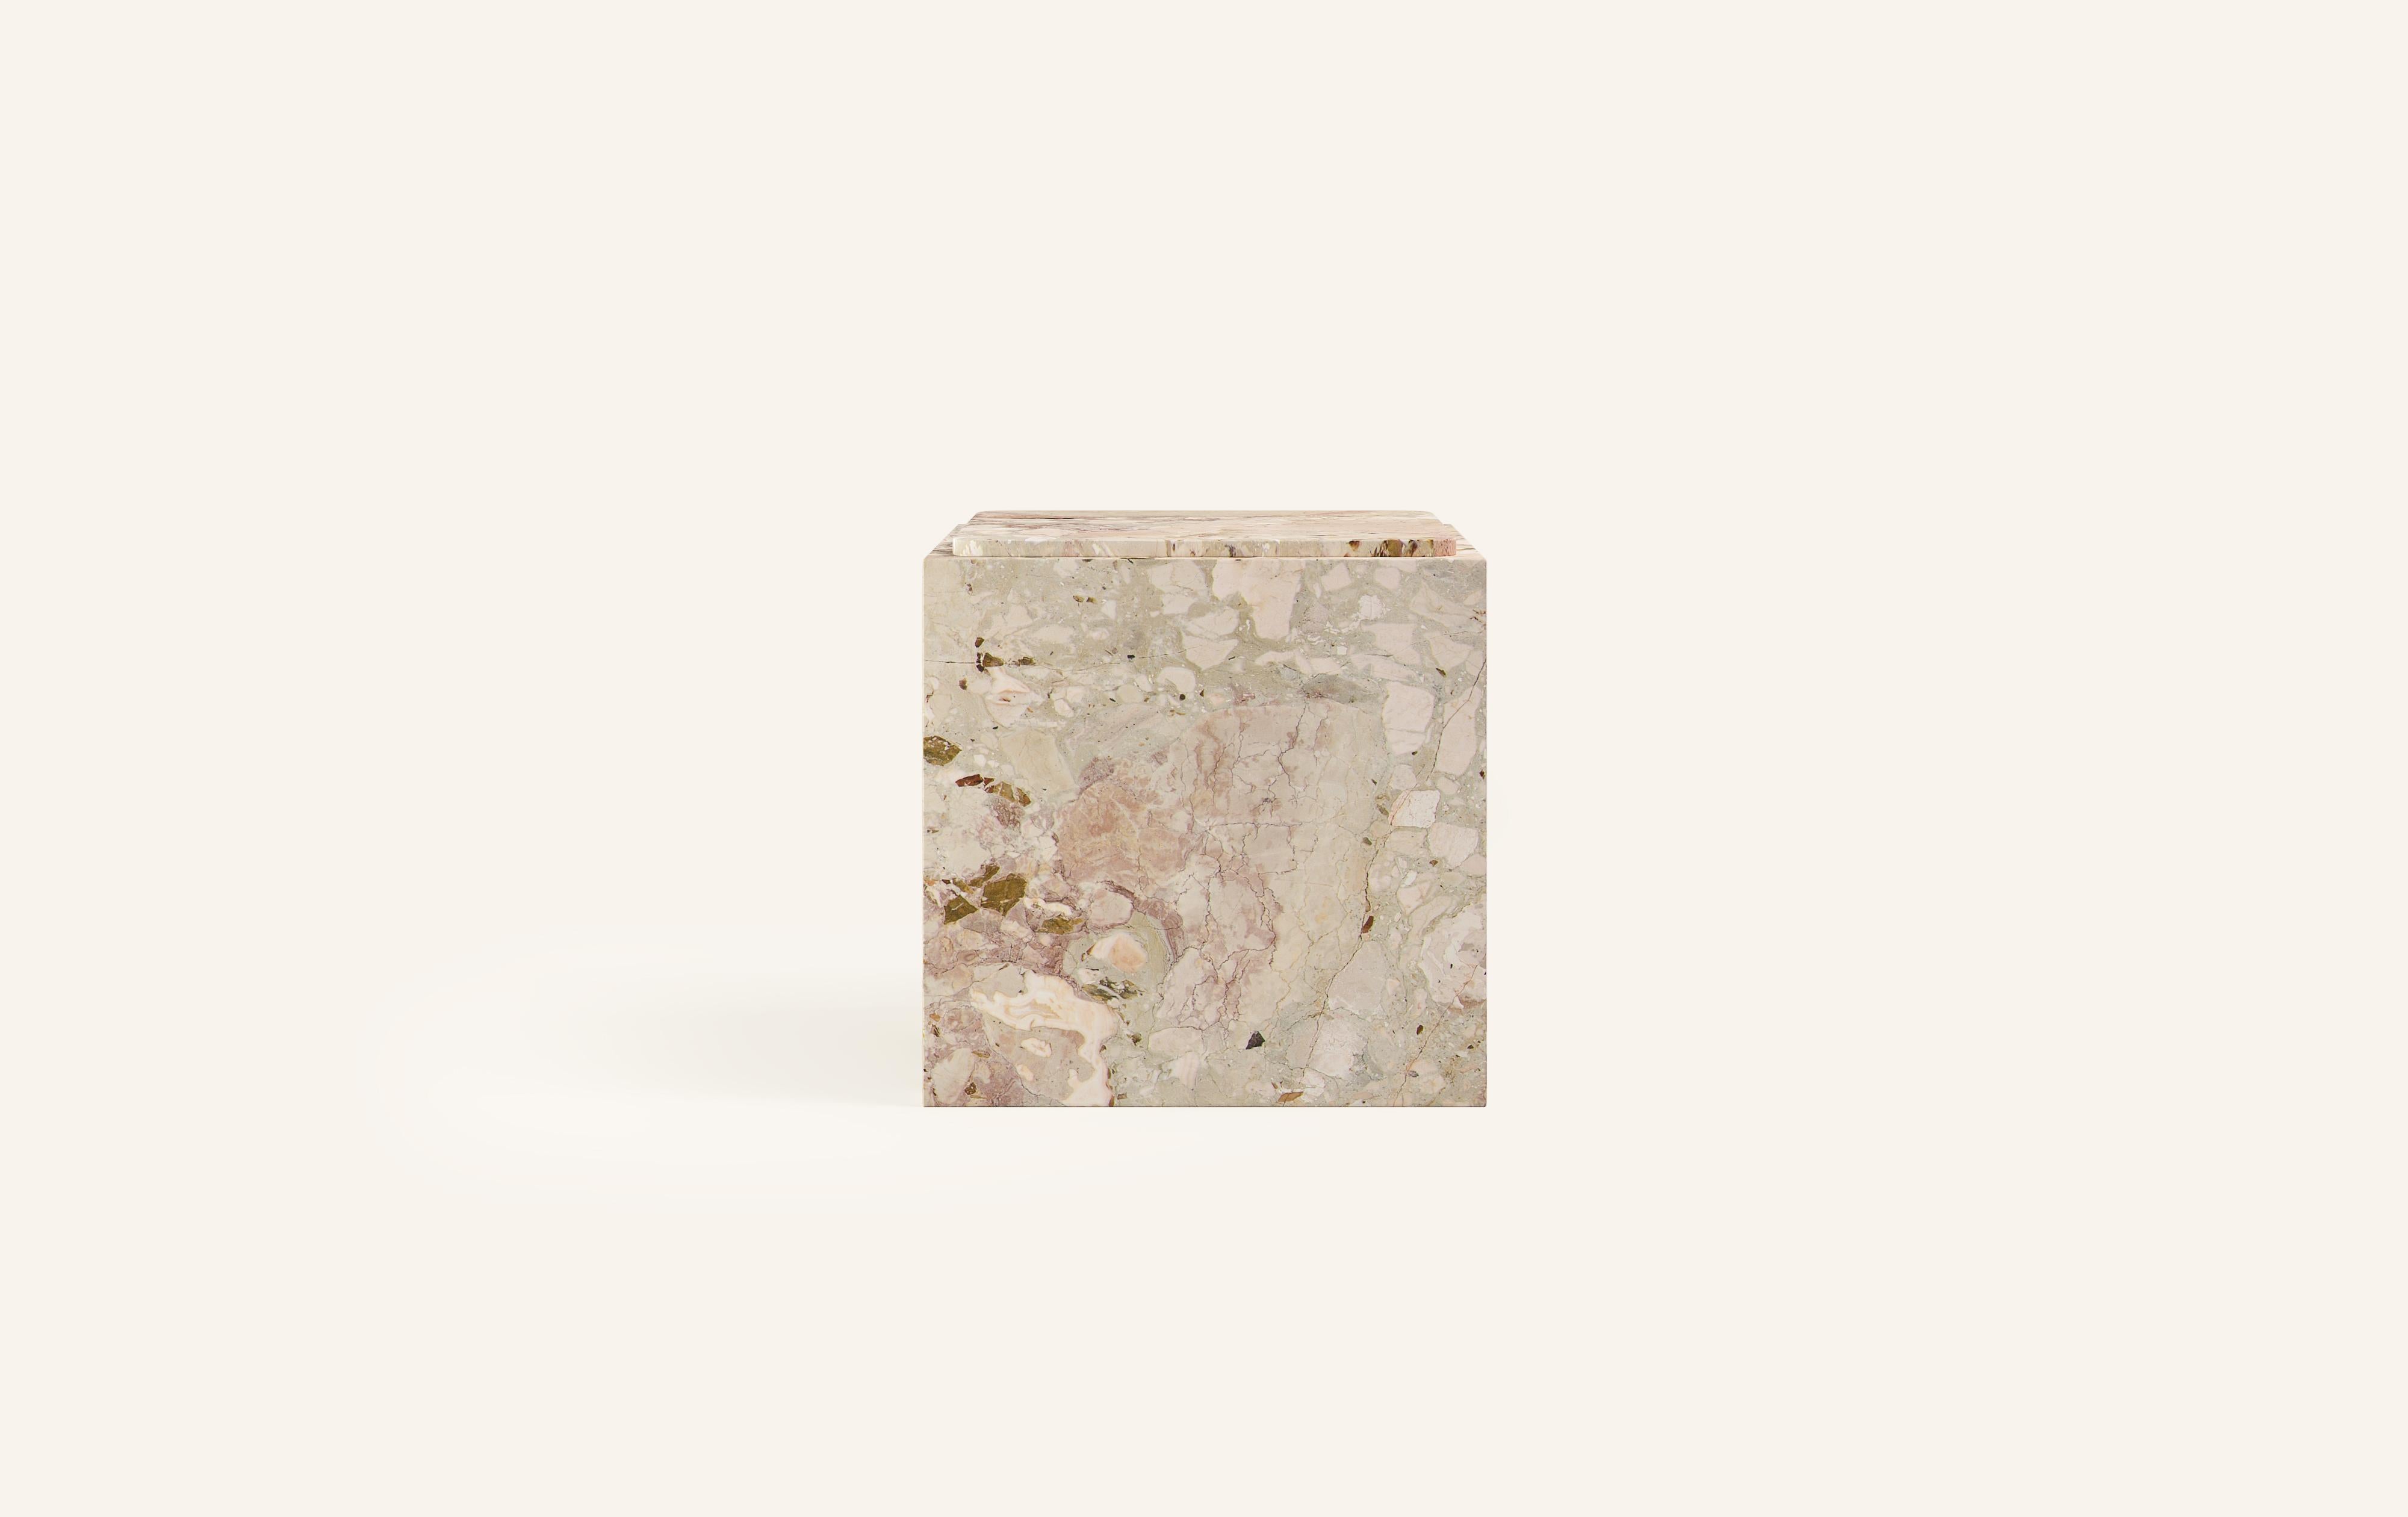 MONOLITHIC FORMS SOFTENED BY GENTLE EDGES. WITH ITS BOLD MARBLE PATTERNS CUBO IS AS VERSATILE AS IT IS STRIKING.

DIMENSIONS:
18”L x 18”W x 19”H: 
- 3/4